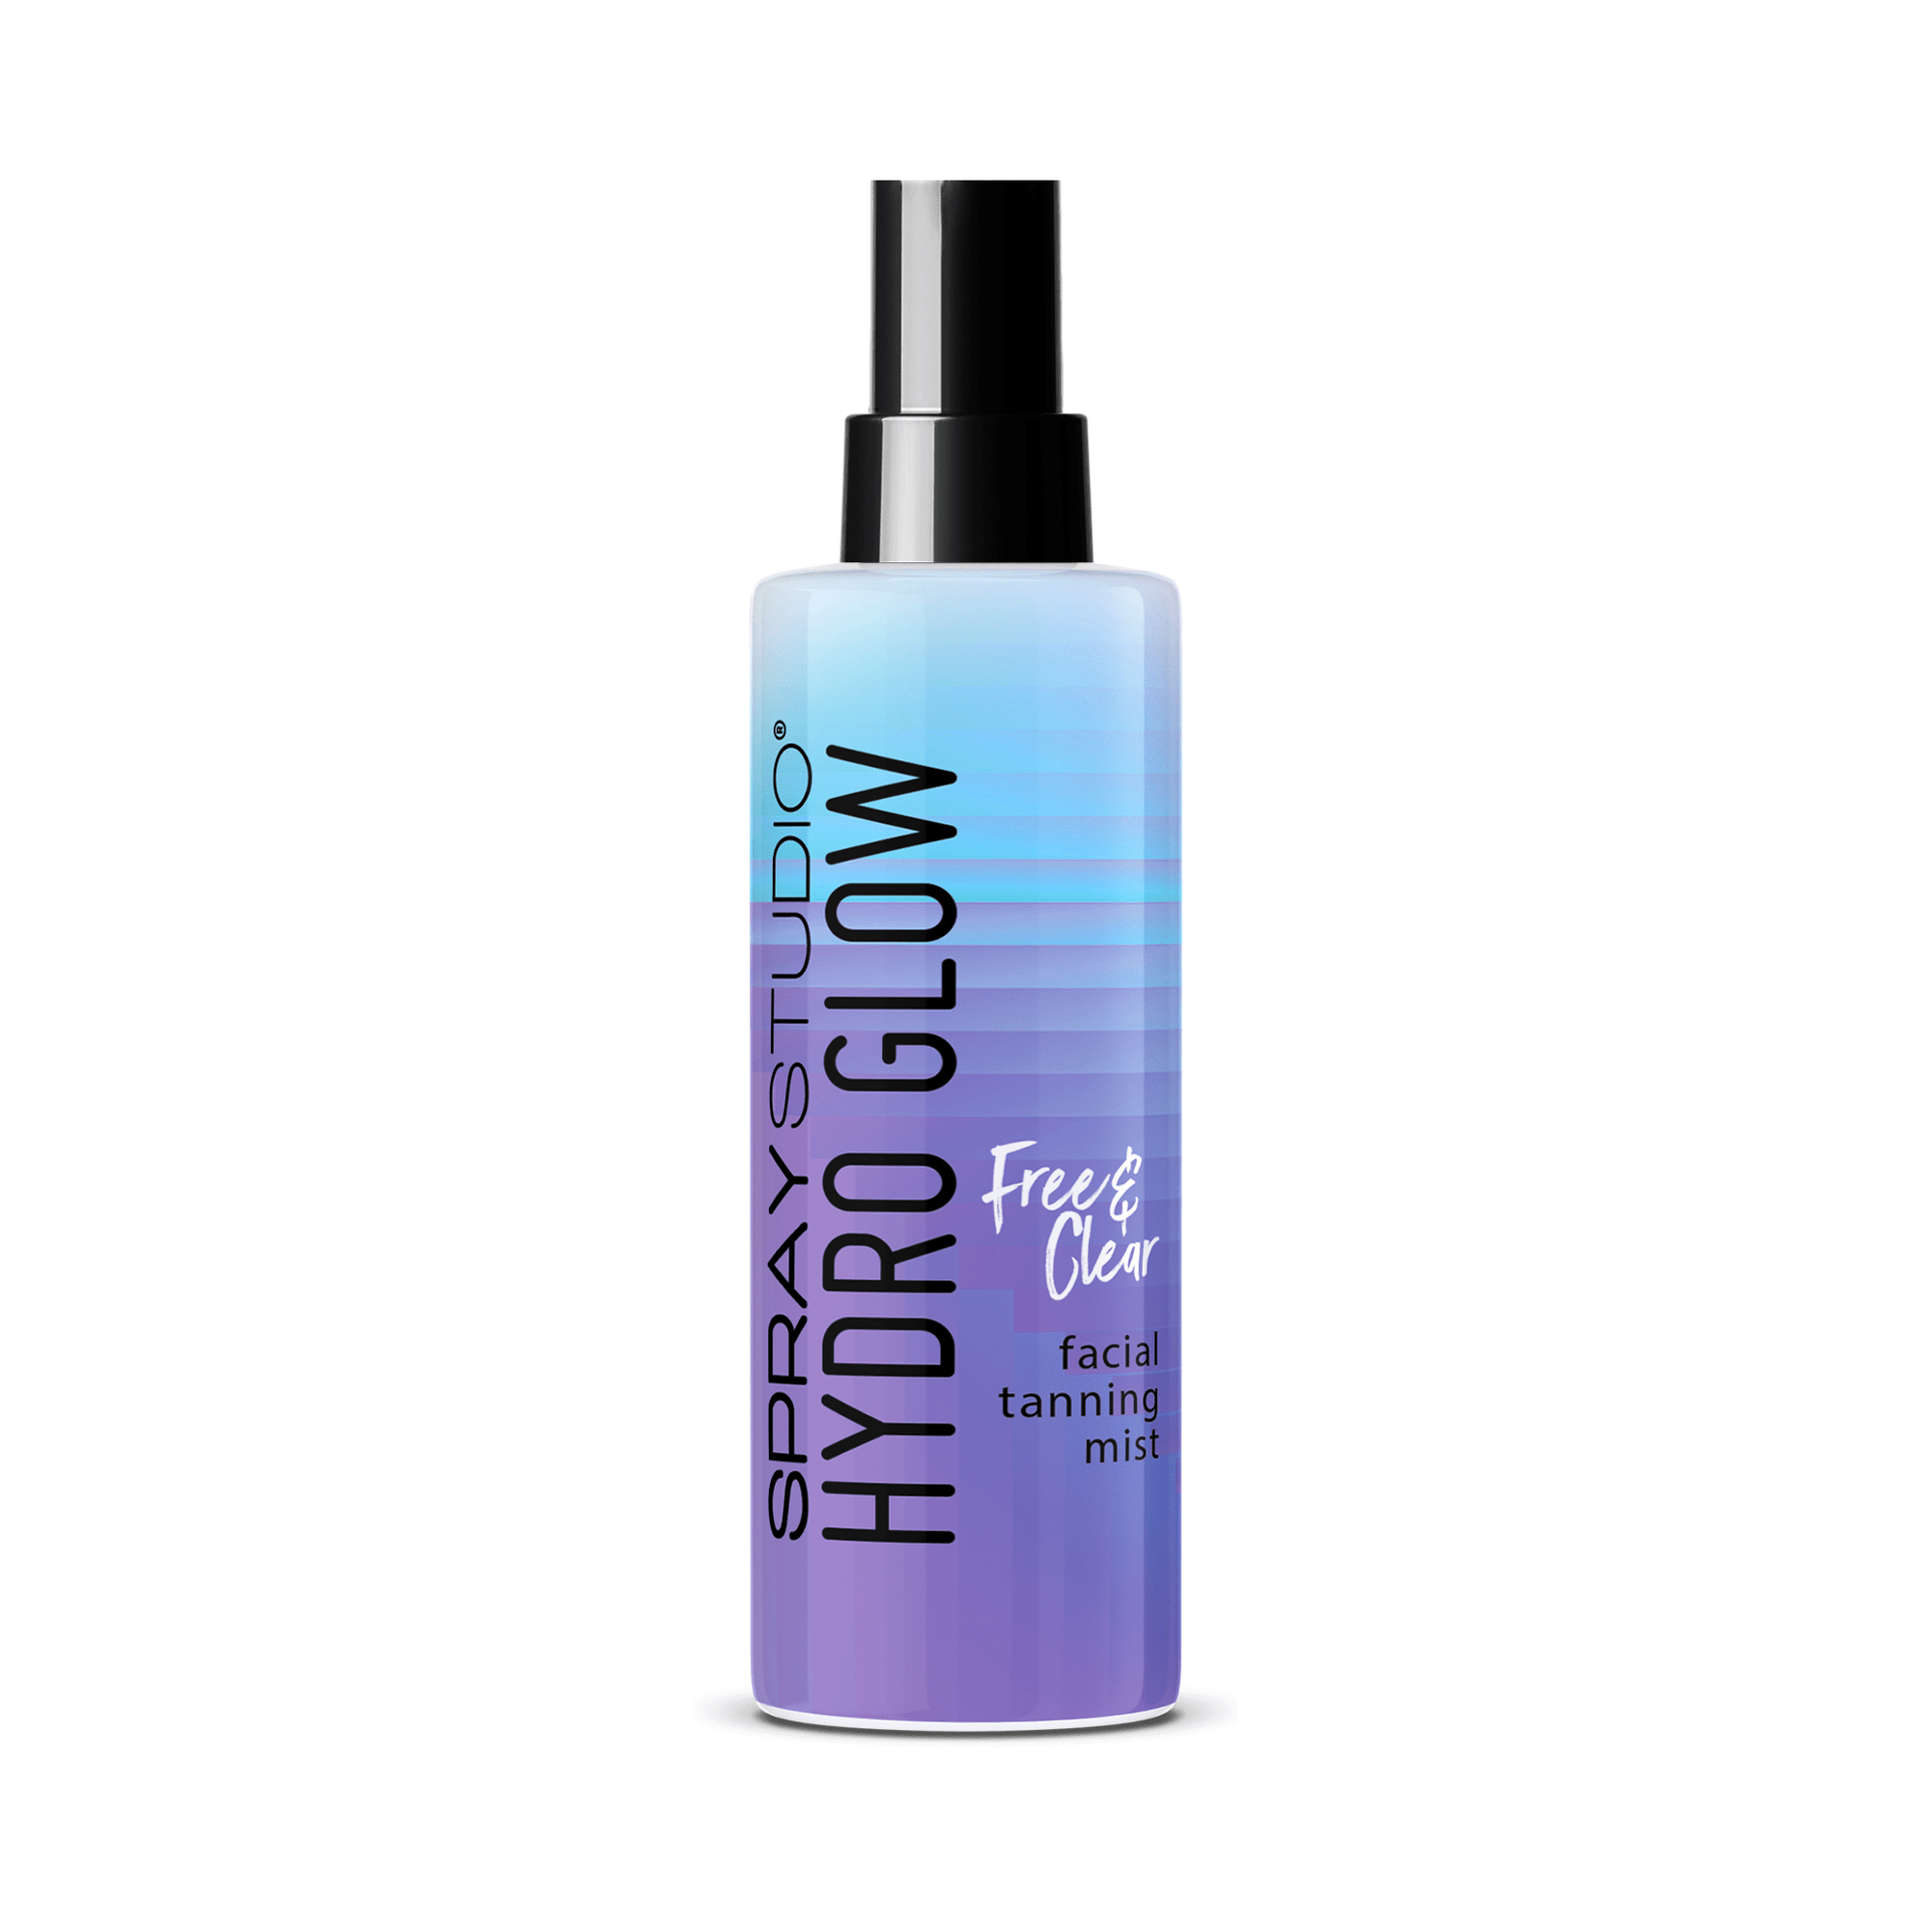 Hydro Glow Facial Tanning Mist "FREE and CLEAR" - SPRAY STUDIO® | sunless tanning and body care